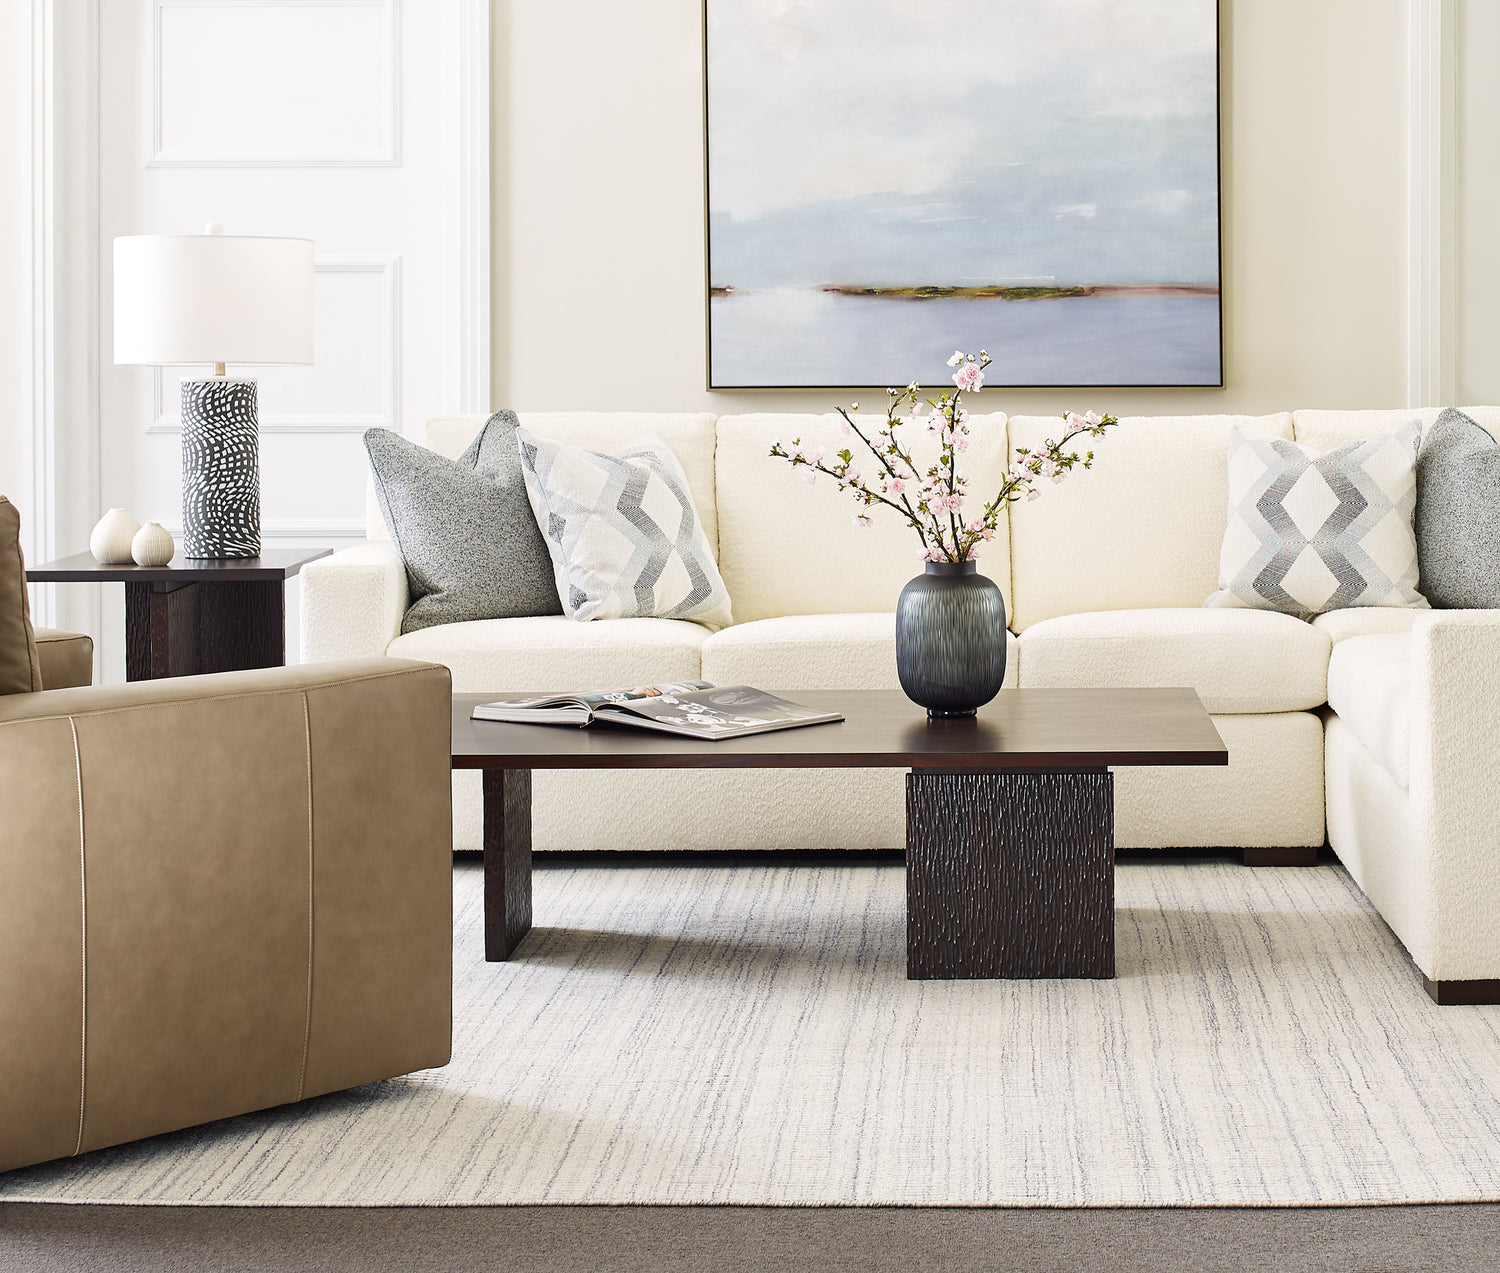 Origins by Stickley Keene white sectional with gray and white accent pillows and a dark brown coffee table in front.